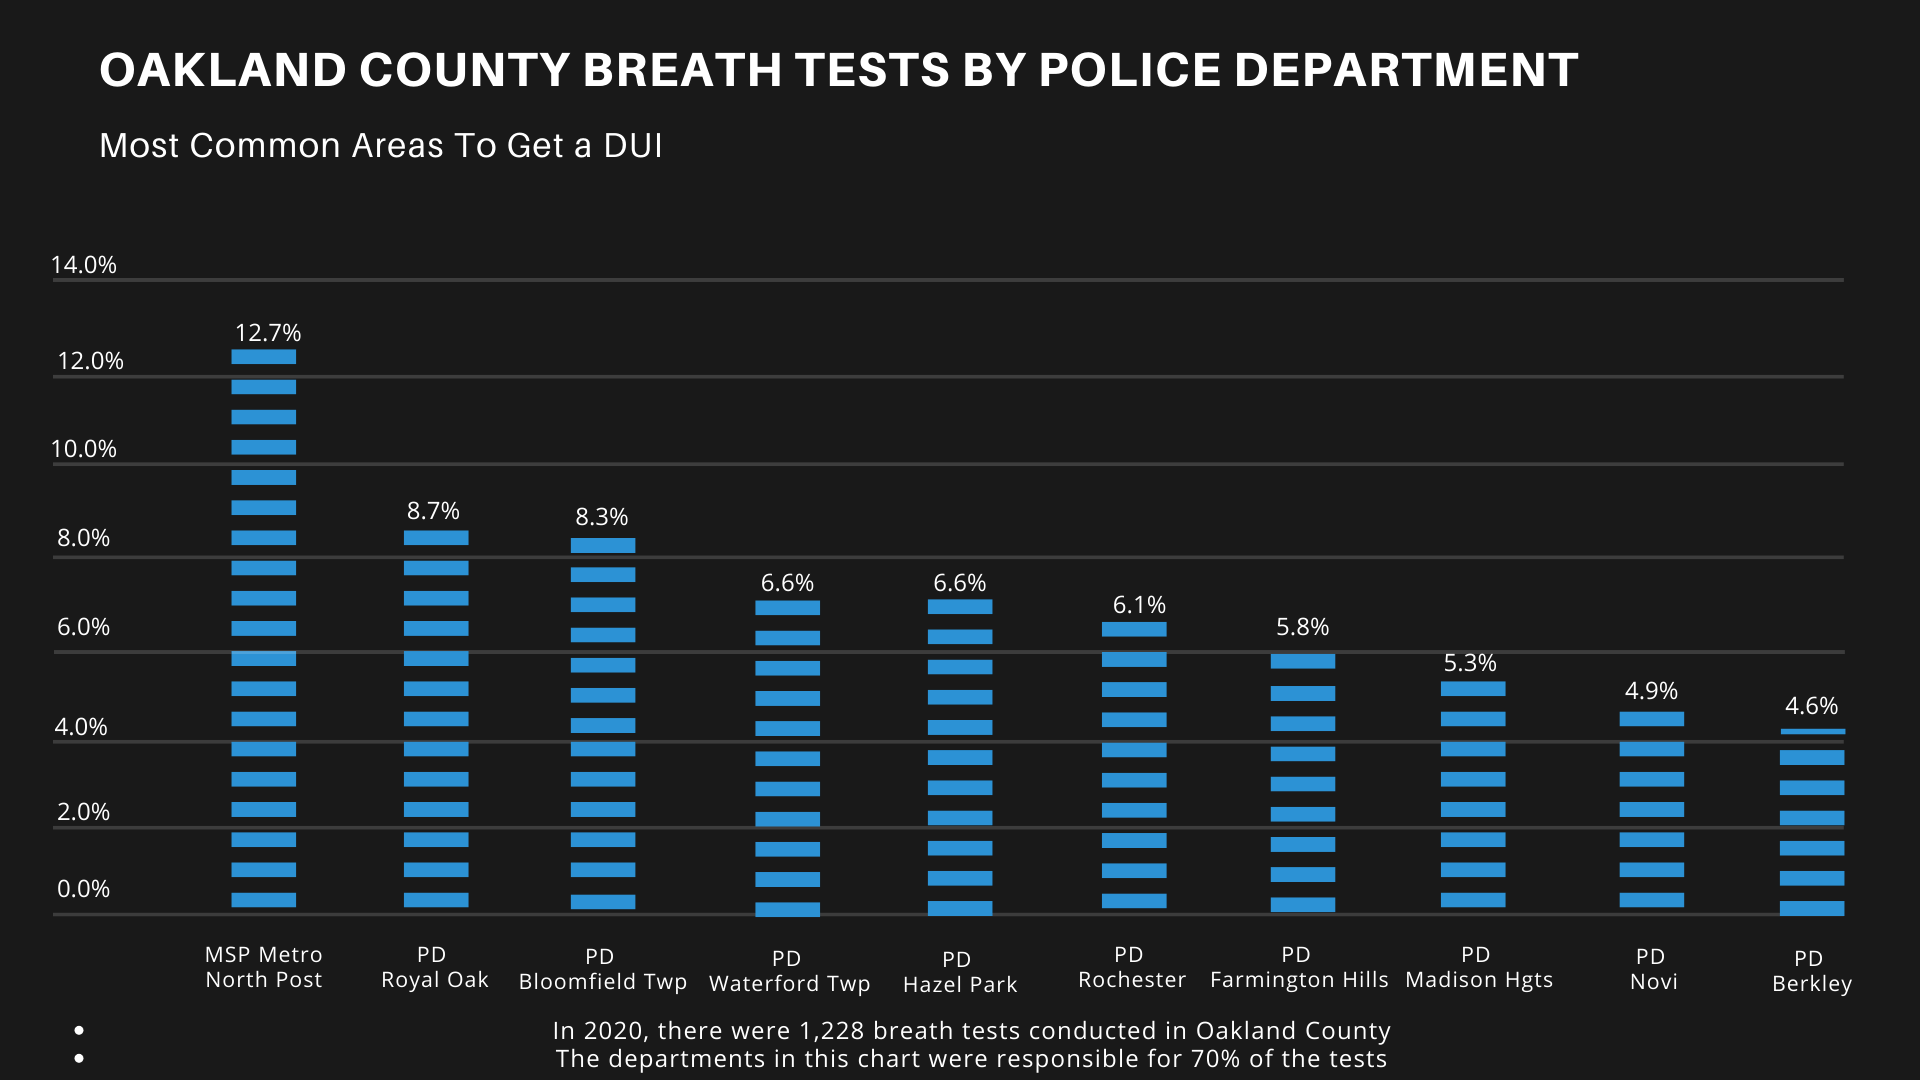 Infographic bar chart that shows a breakdown of breath tests conducted in 2020 for Oakland County, Michigan. The Michigan State Police and Royal Oak have the highest number of tests conducted according to the graph.